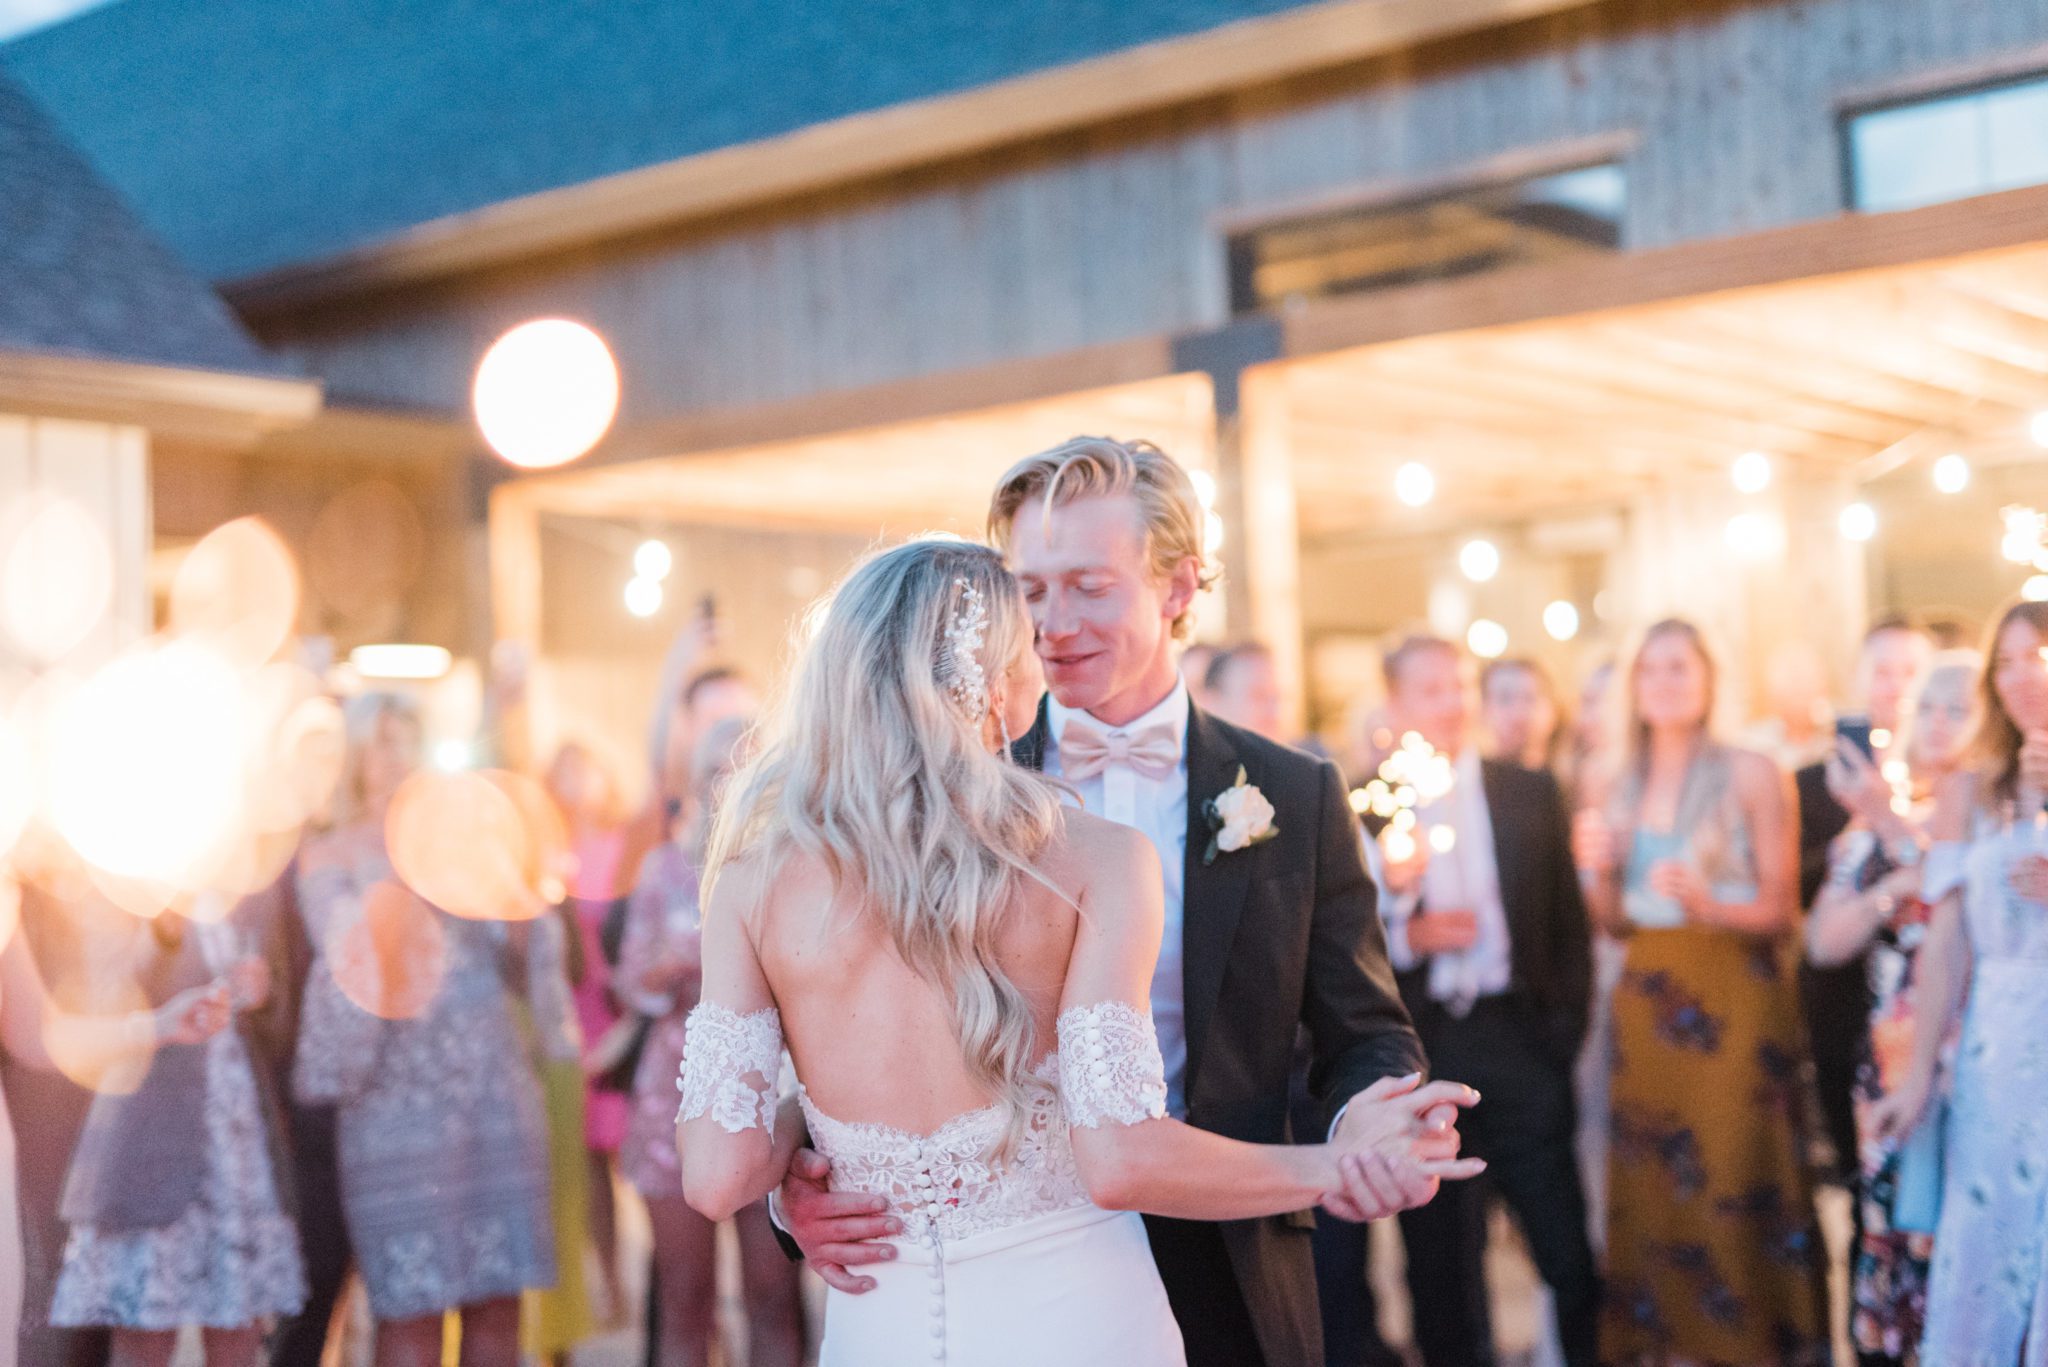 Outdoor barn wedding reception with first dance and sparklers